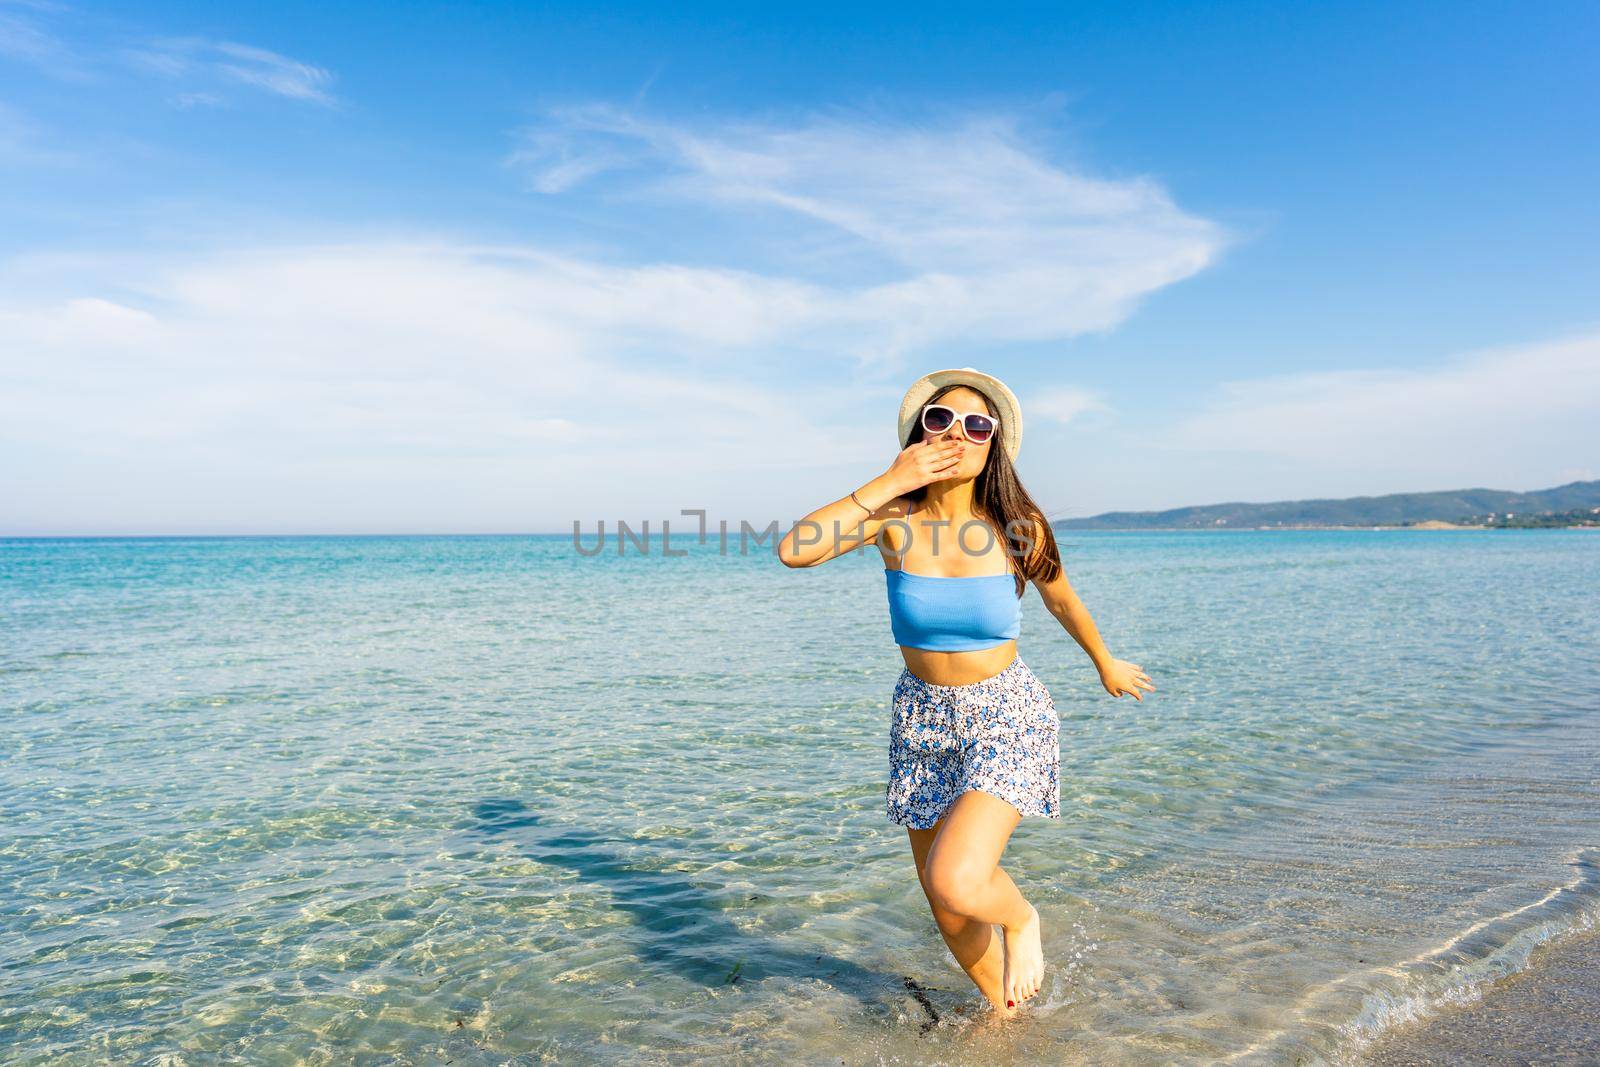 Young beautiful woman making kiss gesture with hand on mouth looking at camera walking in the seawater wearing white hat and sunglasses. Spend your time in travel for a happy better life experience